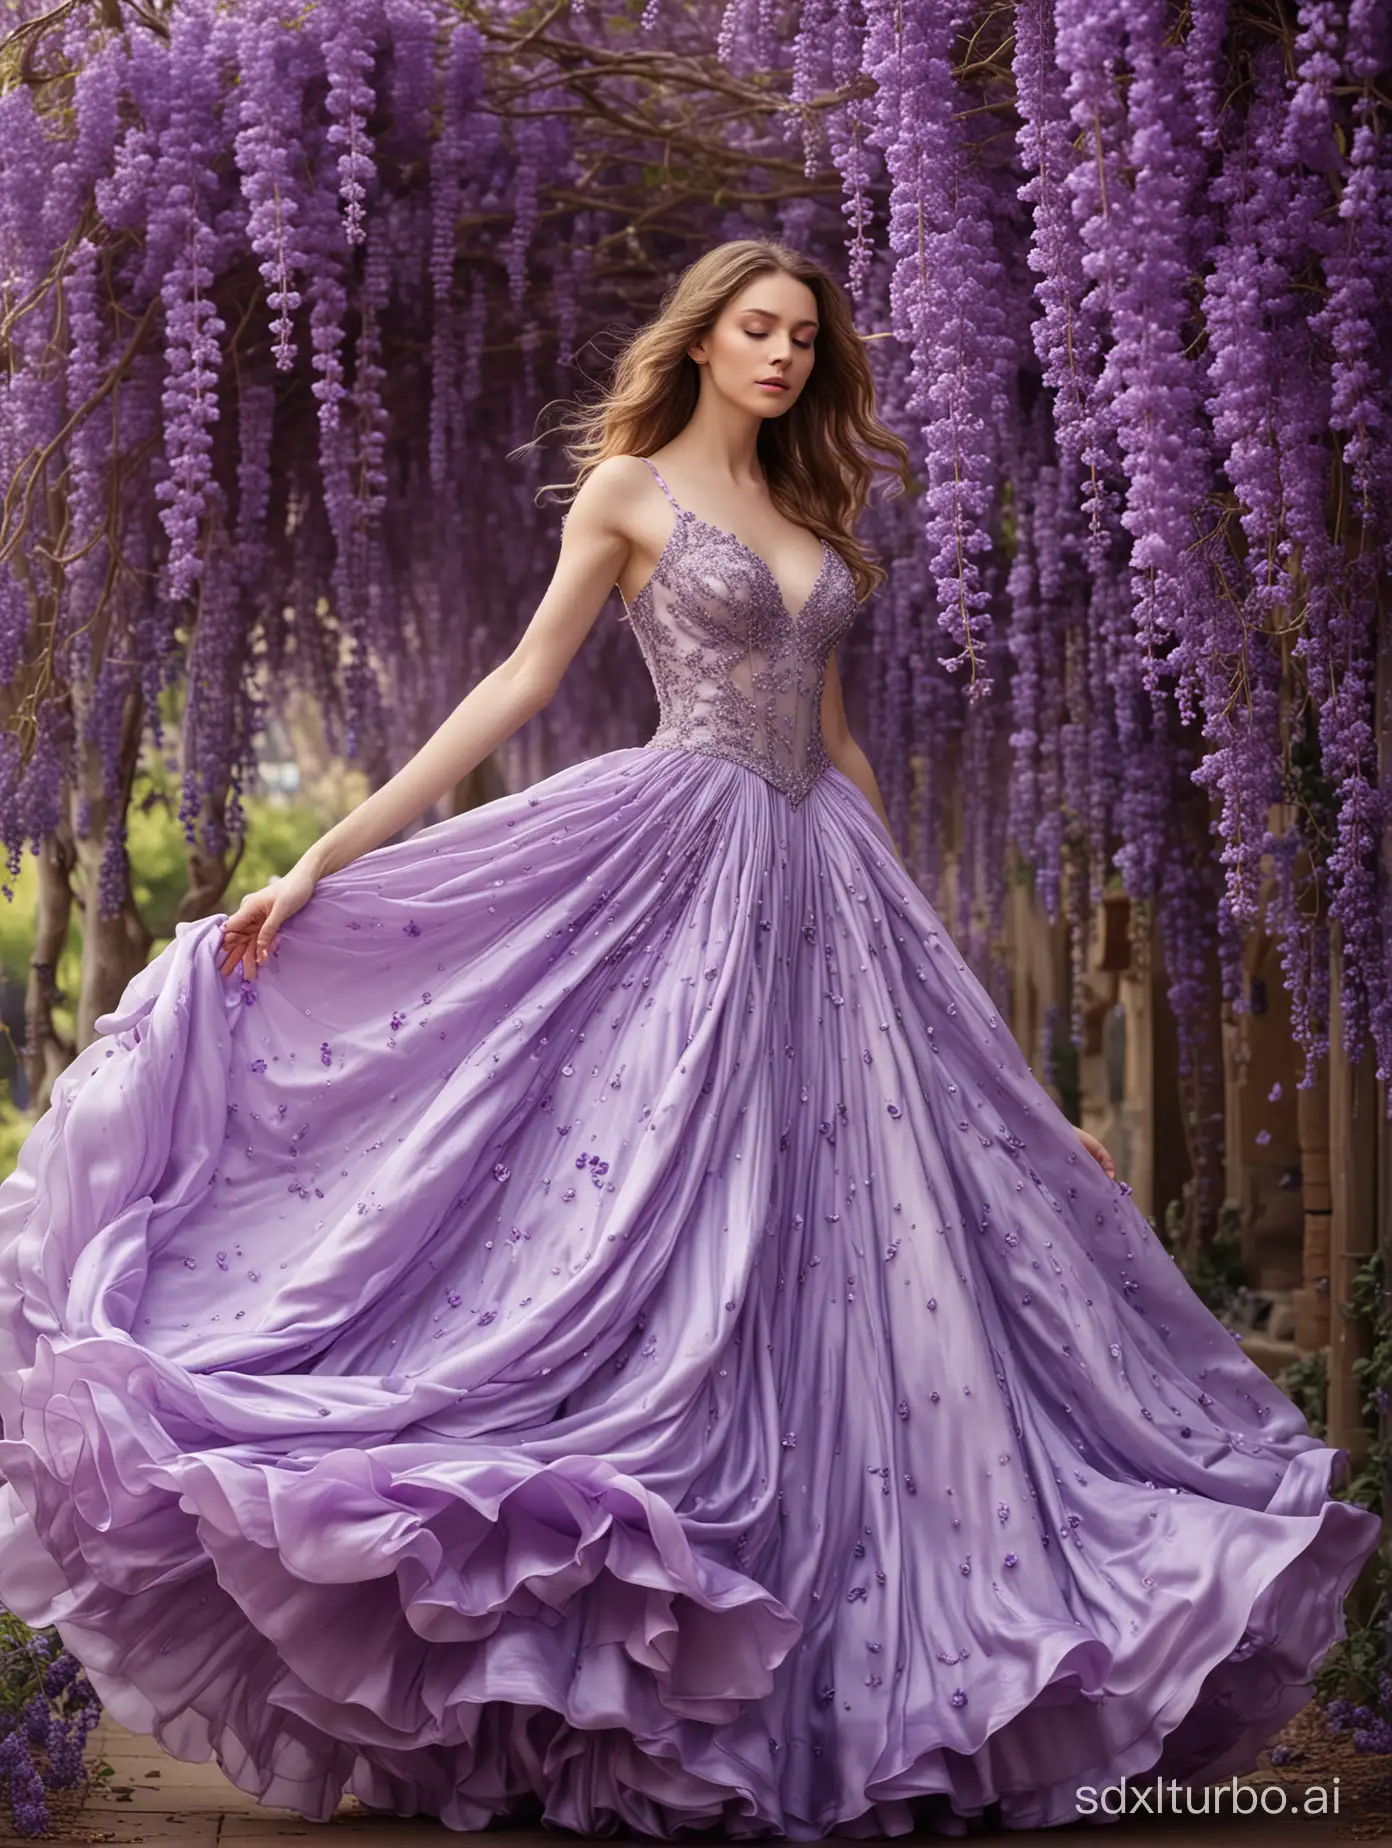 Ethereal-Floral-Fantasy-Lavender-Petals-and-Purple-Satin-Gown